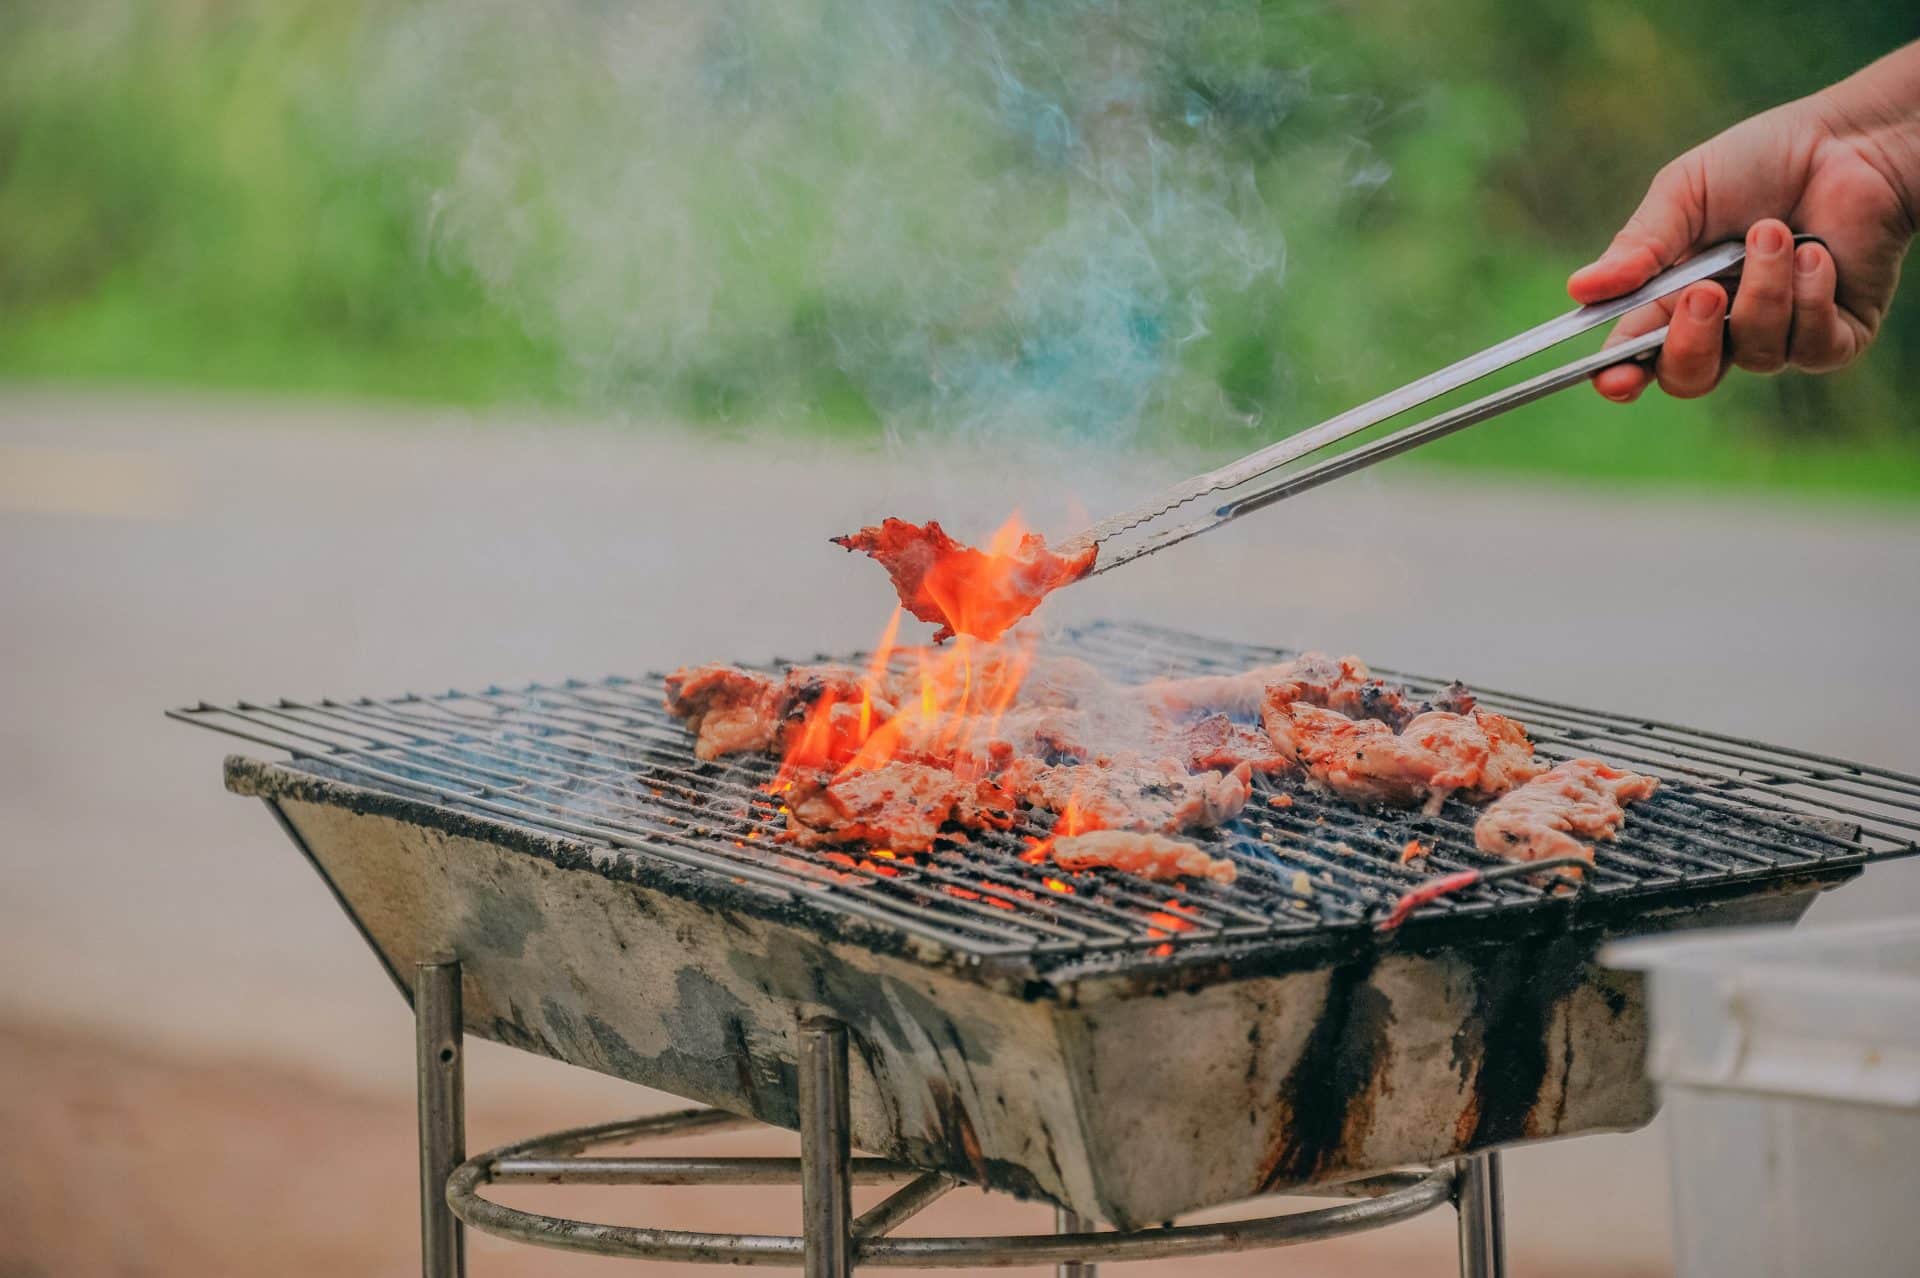 Cleaning your BBQ grill: what you need to know